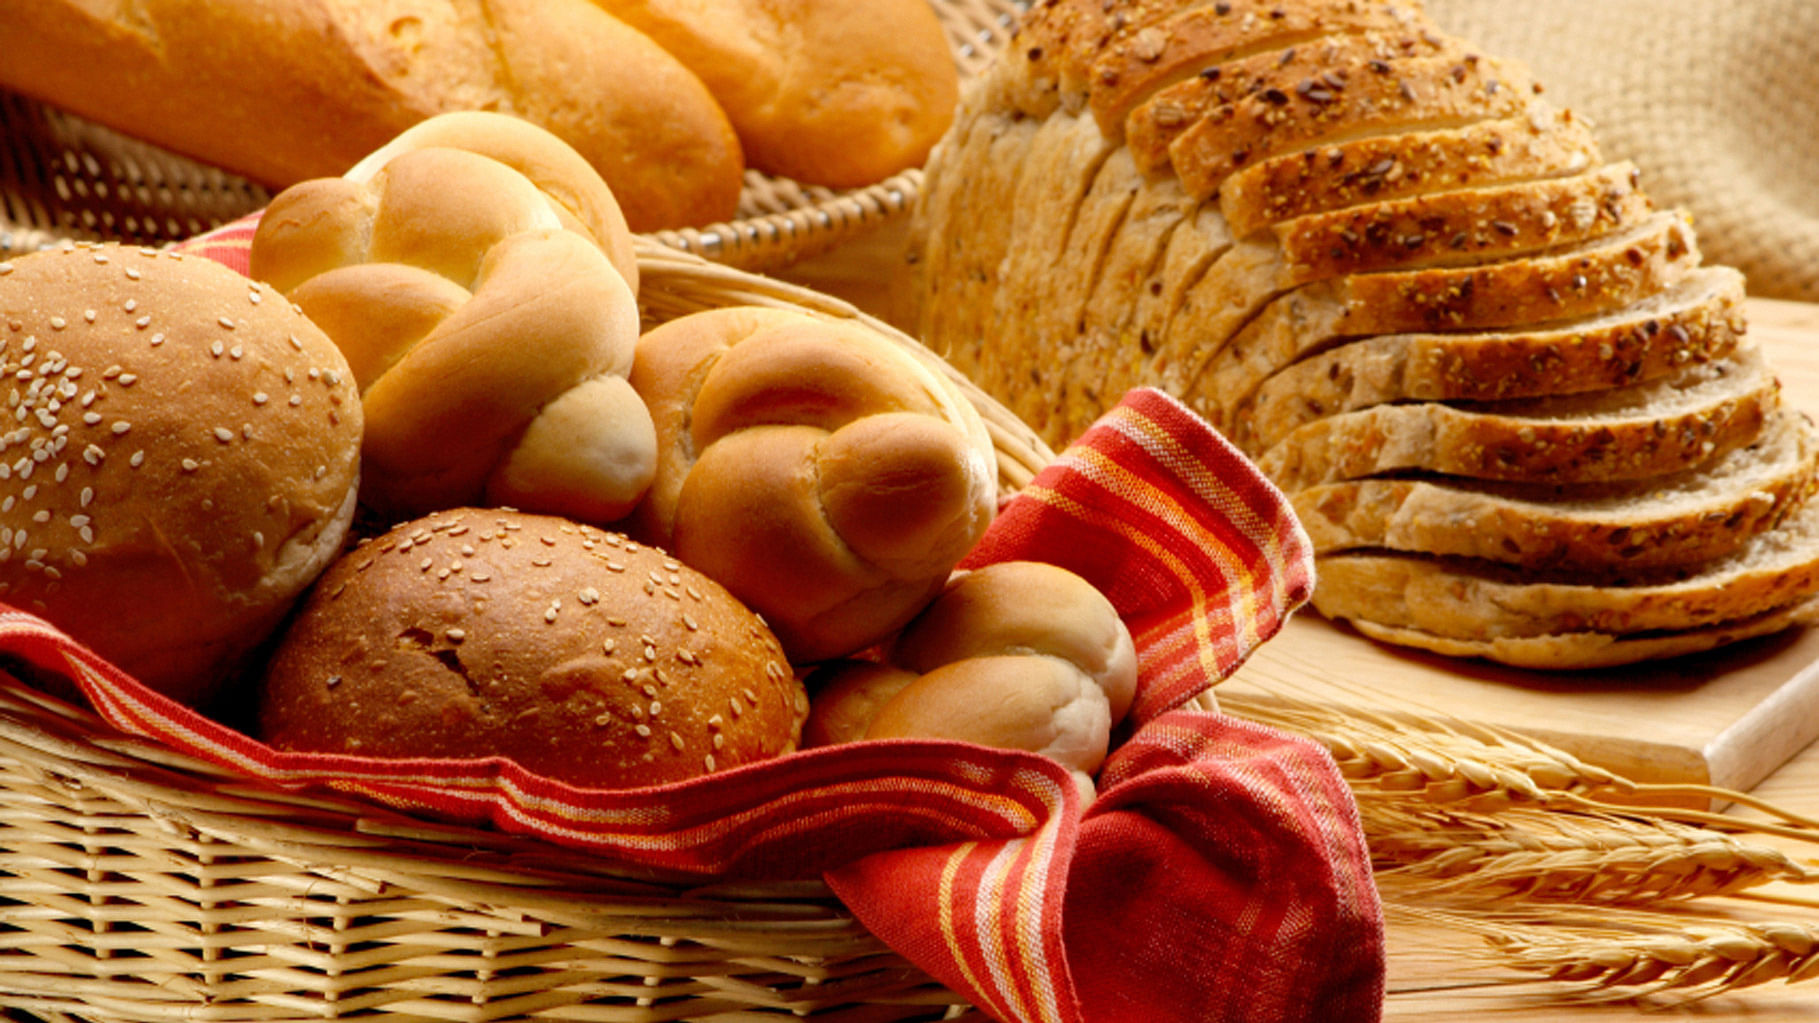 

84 percent of bread and bakery samples collected from all over the city contains residues of potassium bromate, potassium iodate or both. (Photo: iStockphoto)